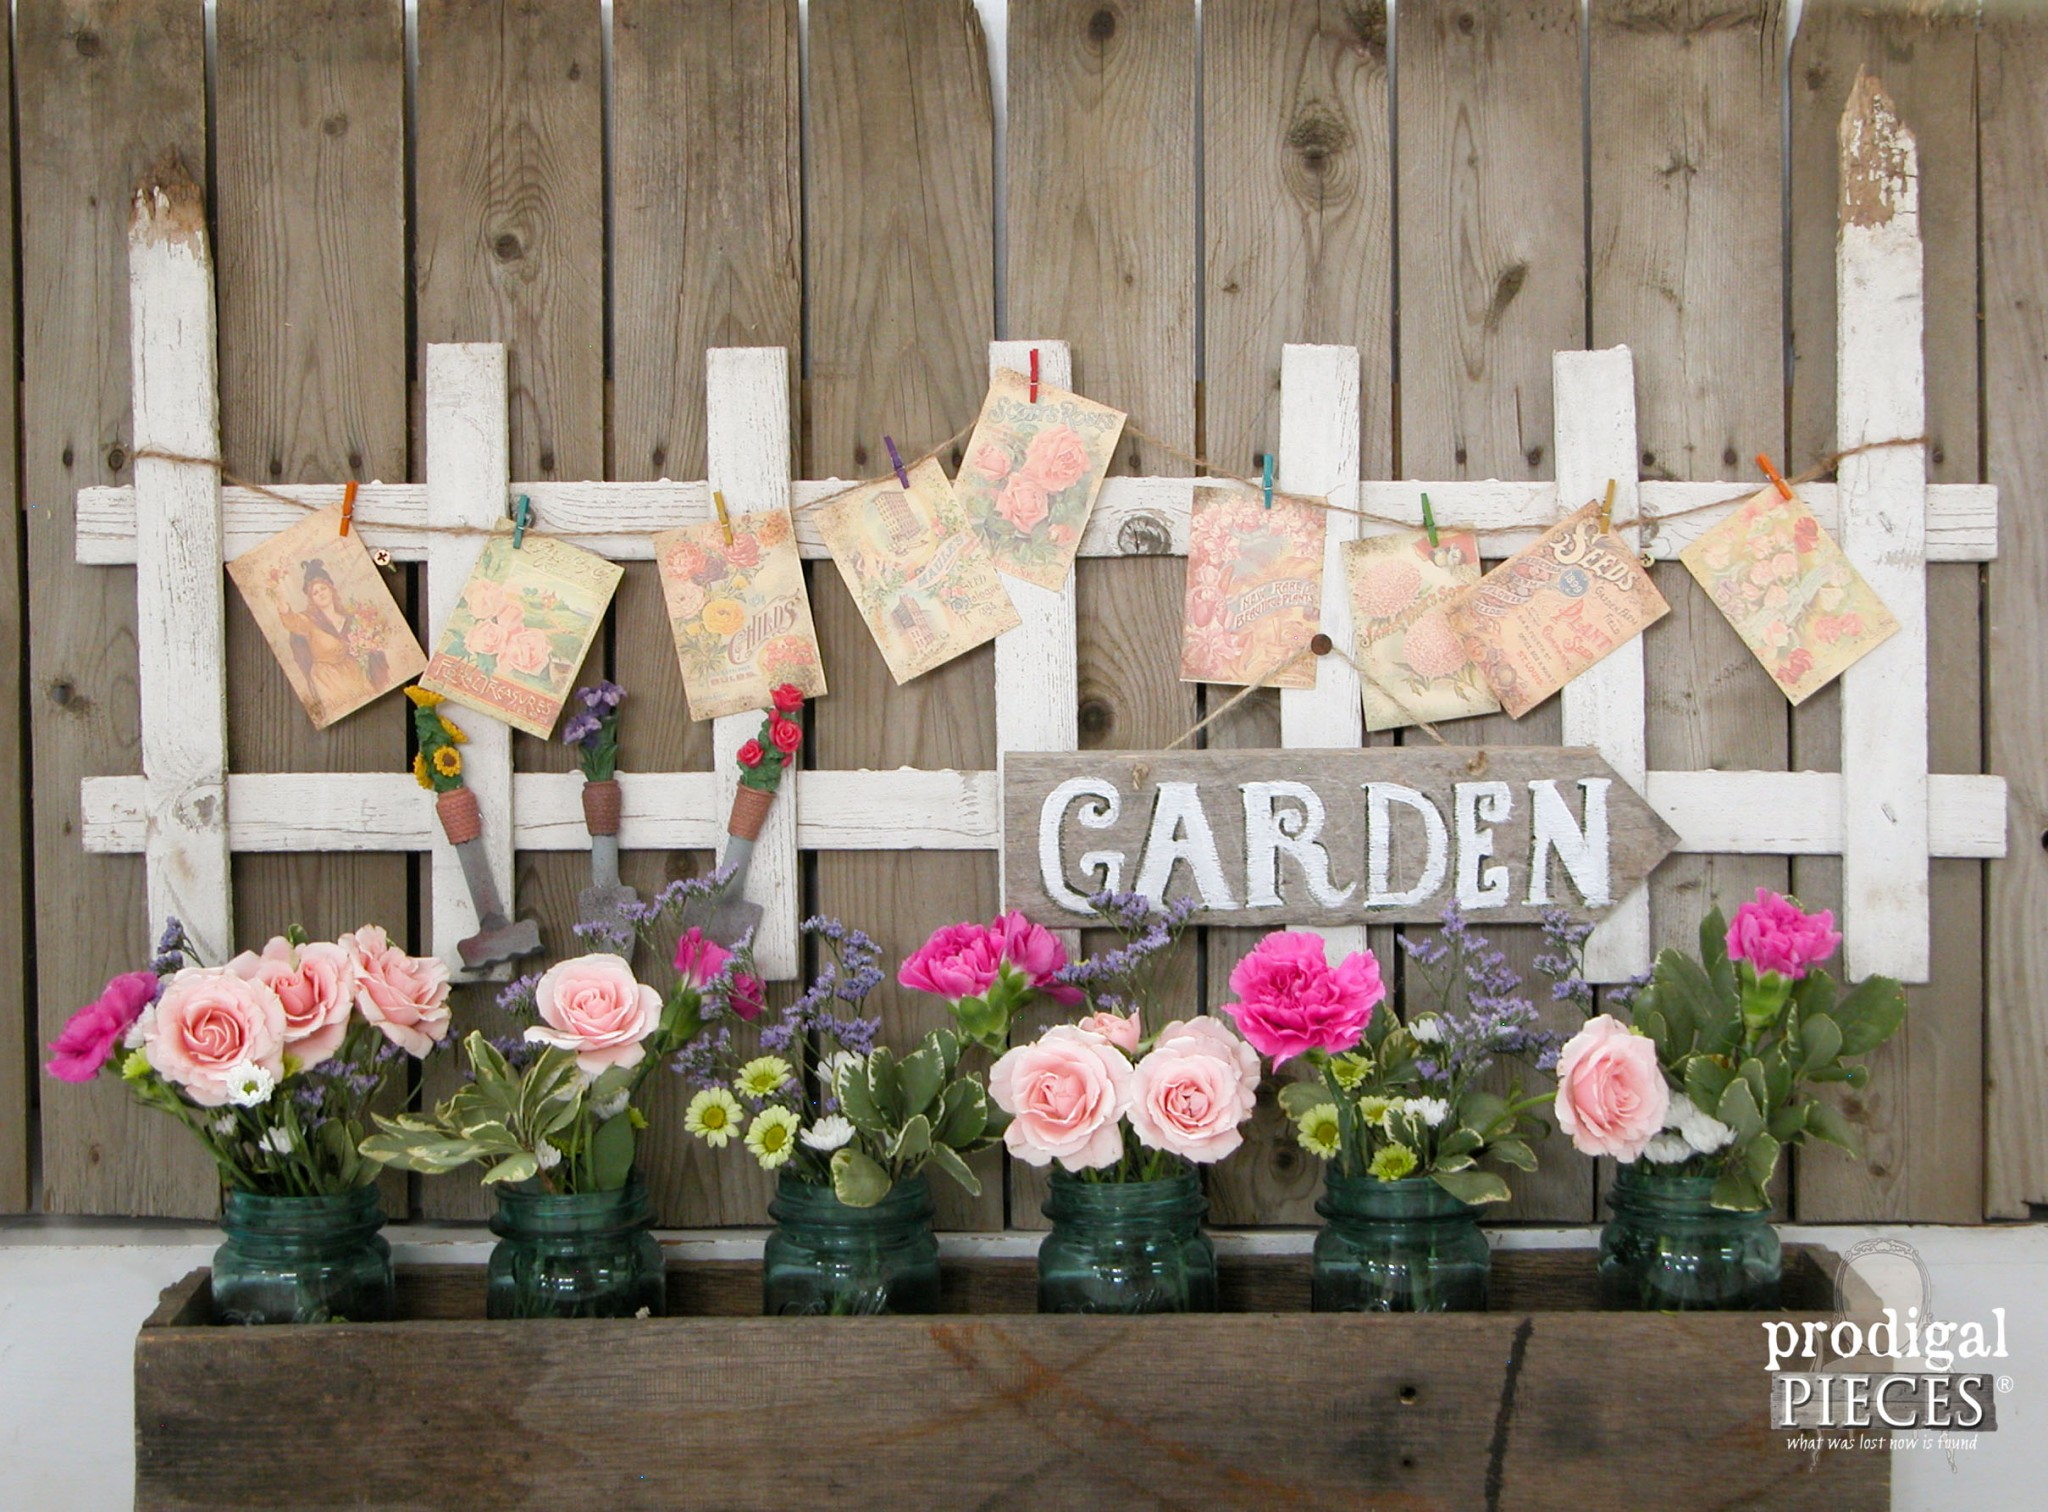 Repurposed Garden Decor from Curbside Picket Fence by Prodigal Pieces | www.prodigalpieces.com